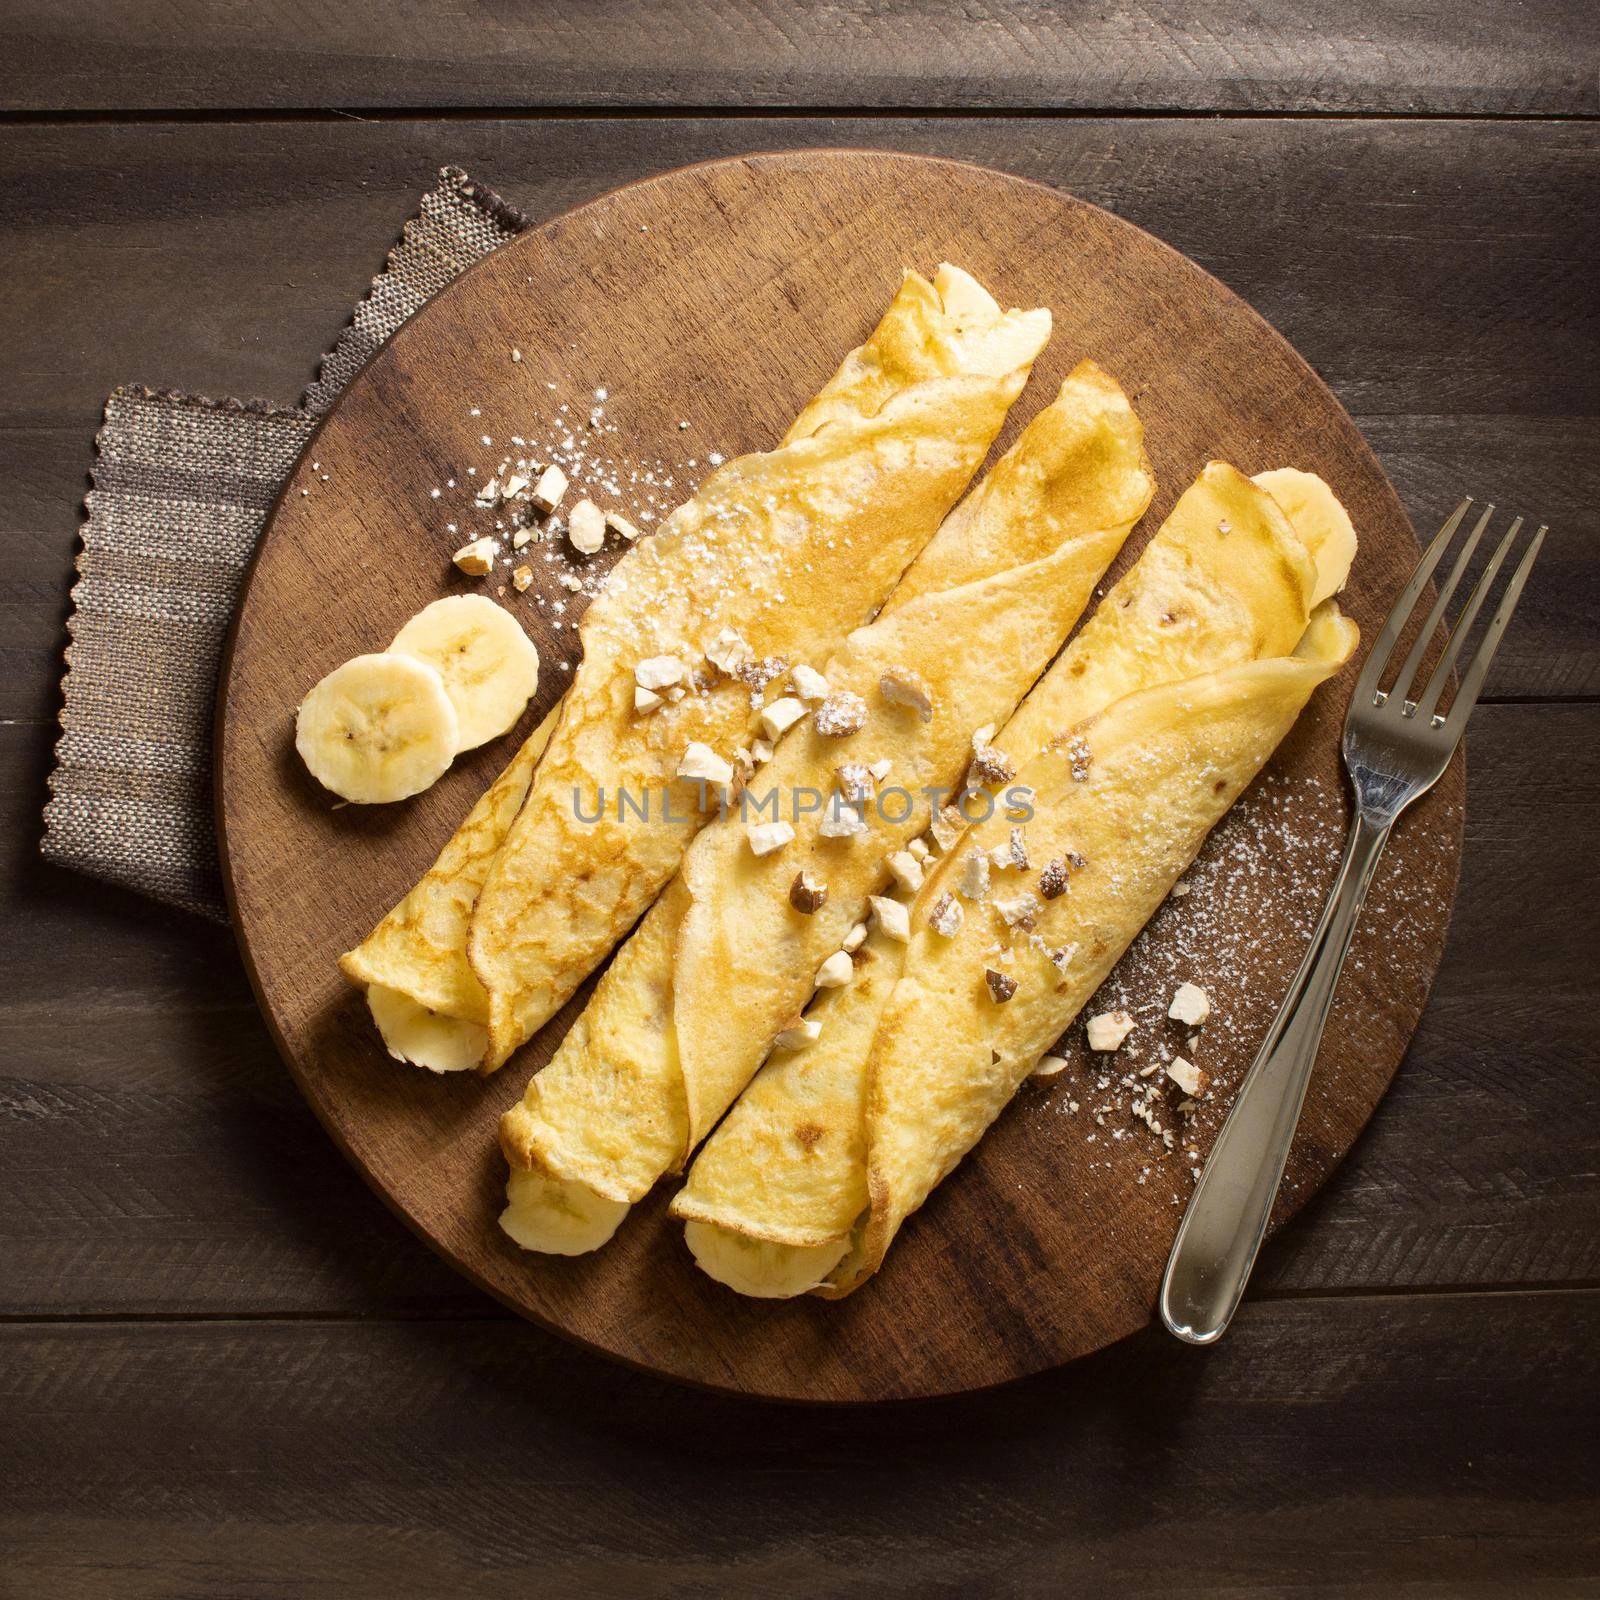 delicious winter crepe dessert with bananas. Resolution and high quality beautiful photo